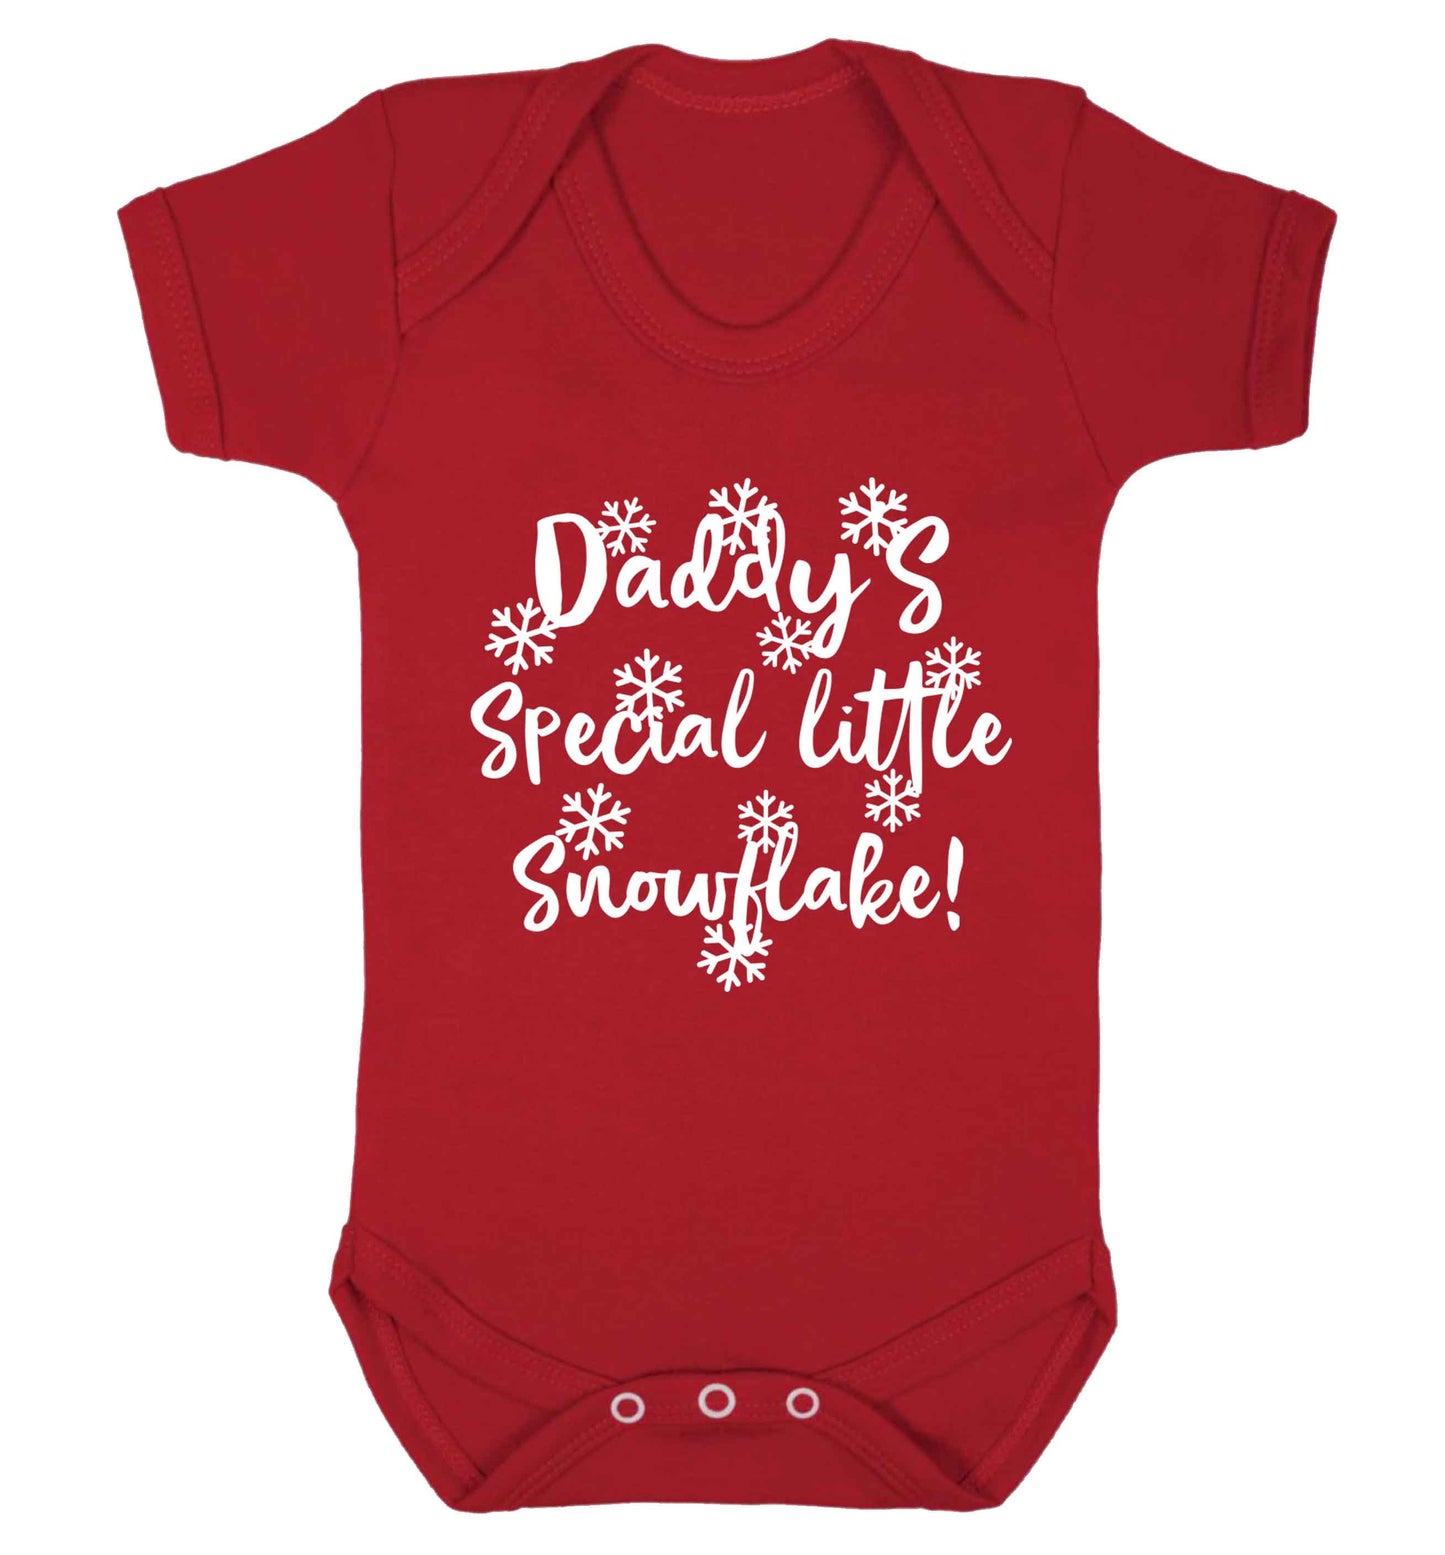 Daddy's special little snowflake Baby Vest red 18-24 months